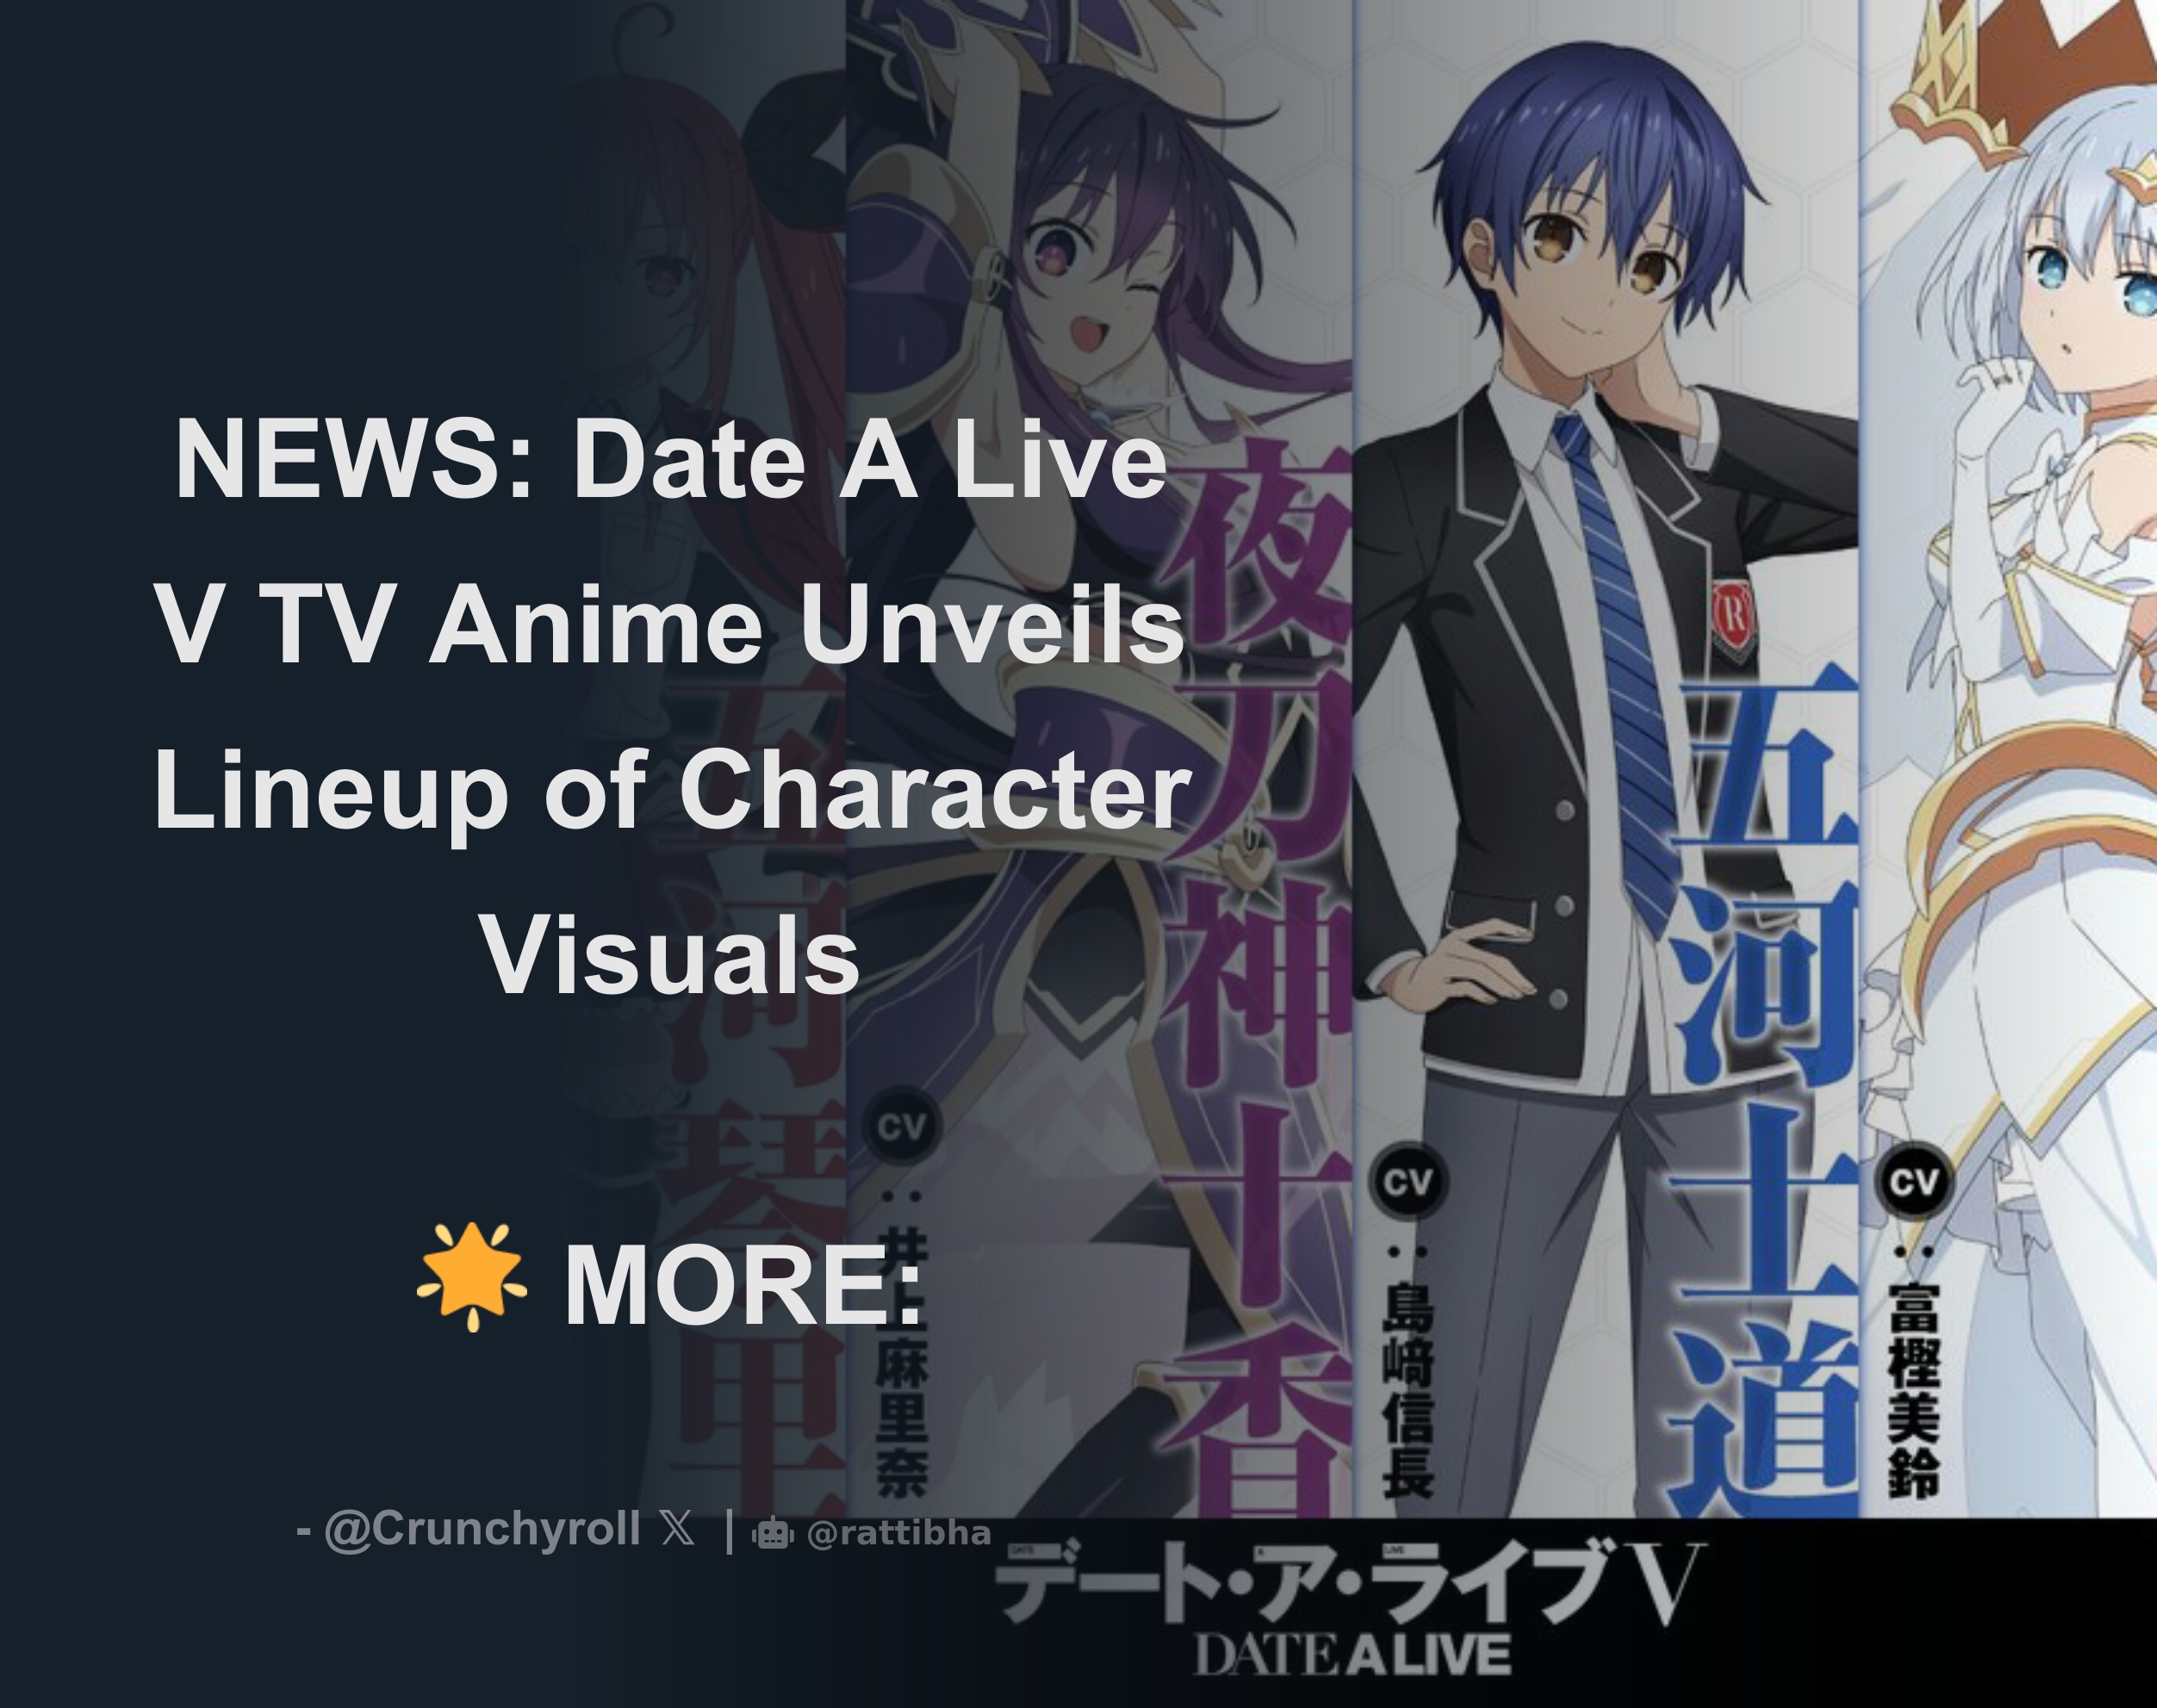 Date A Live V TV Anime Unveils Second Lineup of Character Visuals -  Crunchyroll News